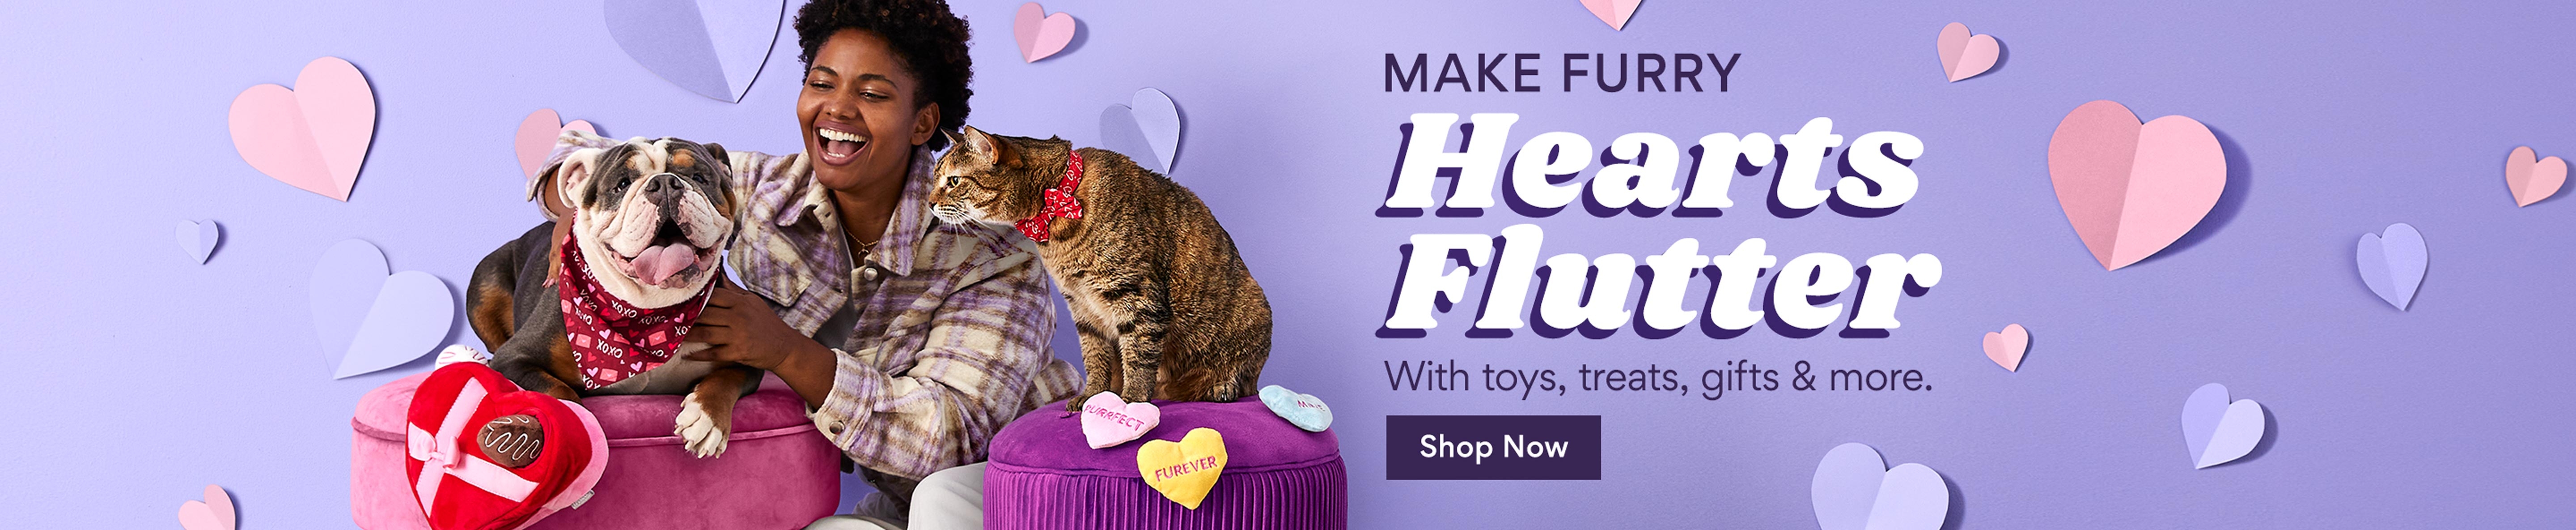 Make furry hearts flutter with toys, treats, gifts & more